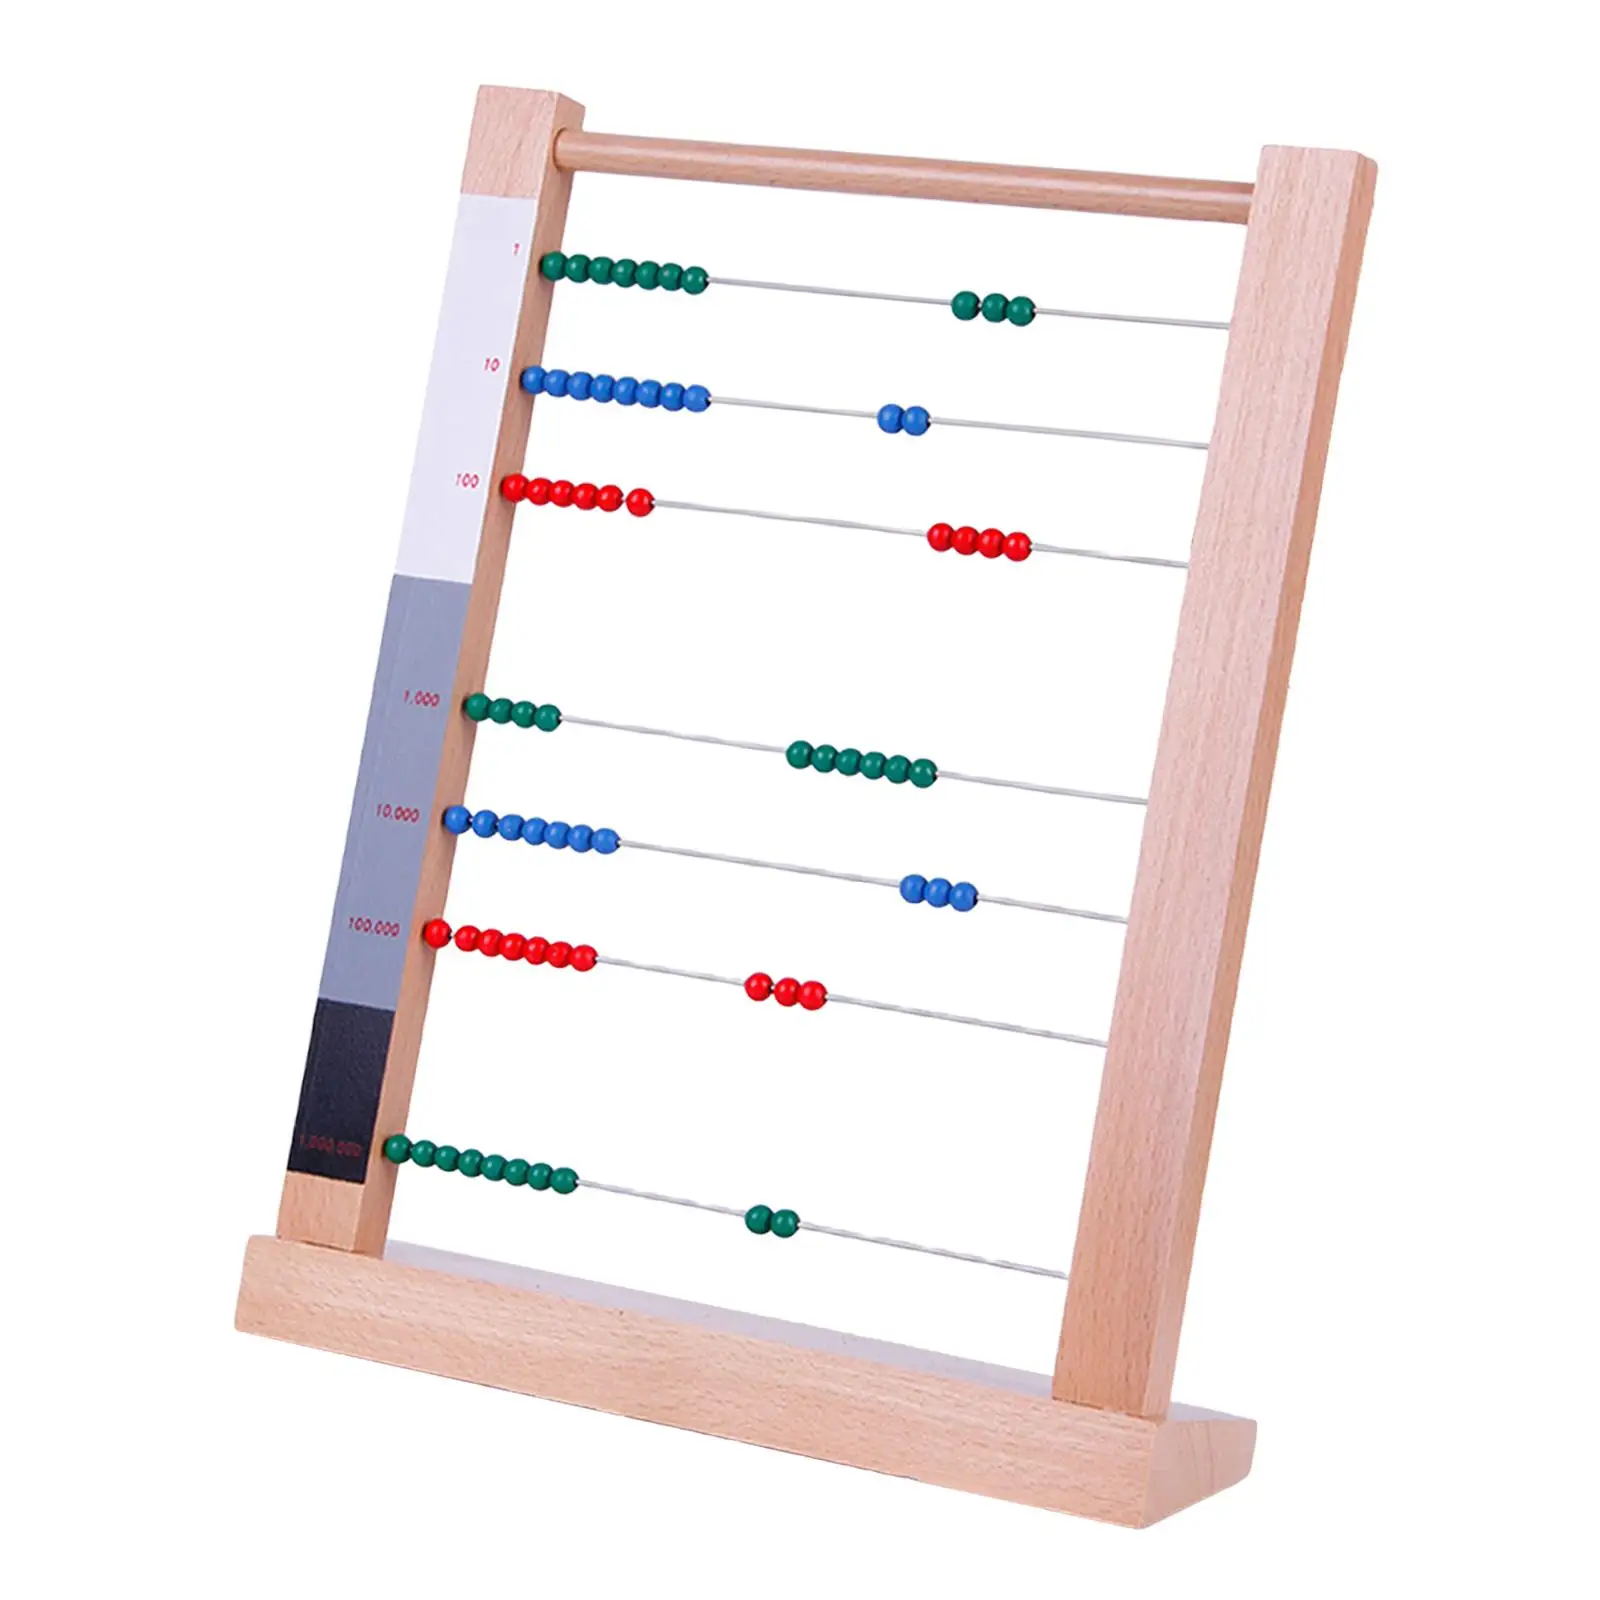 

Mathematics Abacus 7 Rows Counting Frame for Children Kindergarten Boys Girls